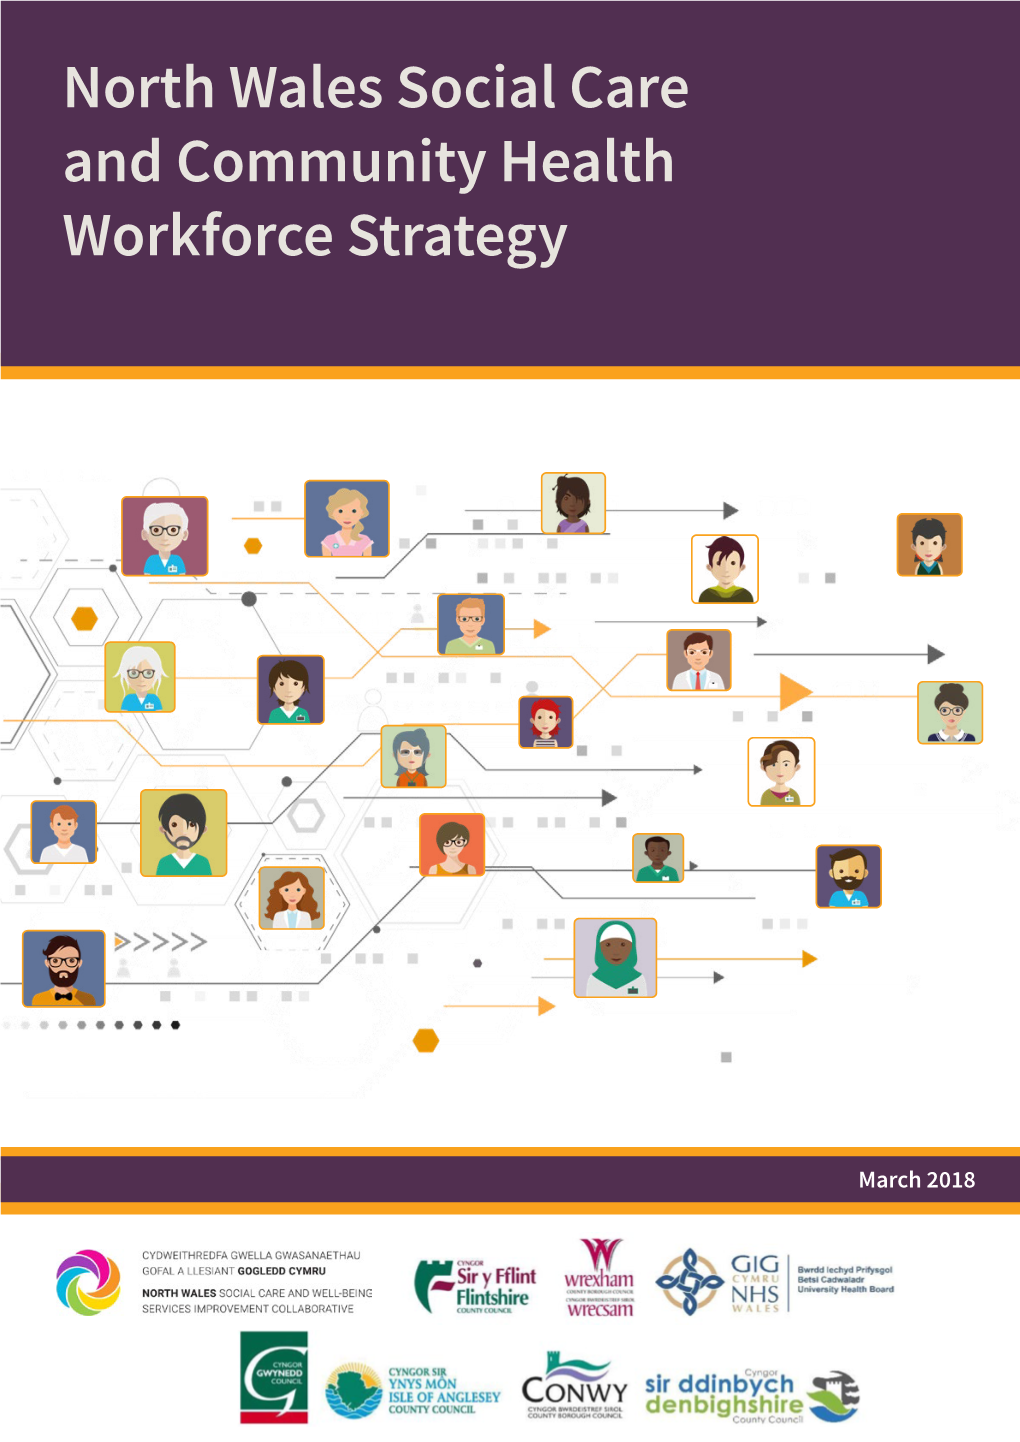 North Wales Social Care and Community Health Workforce Strategy